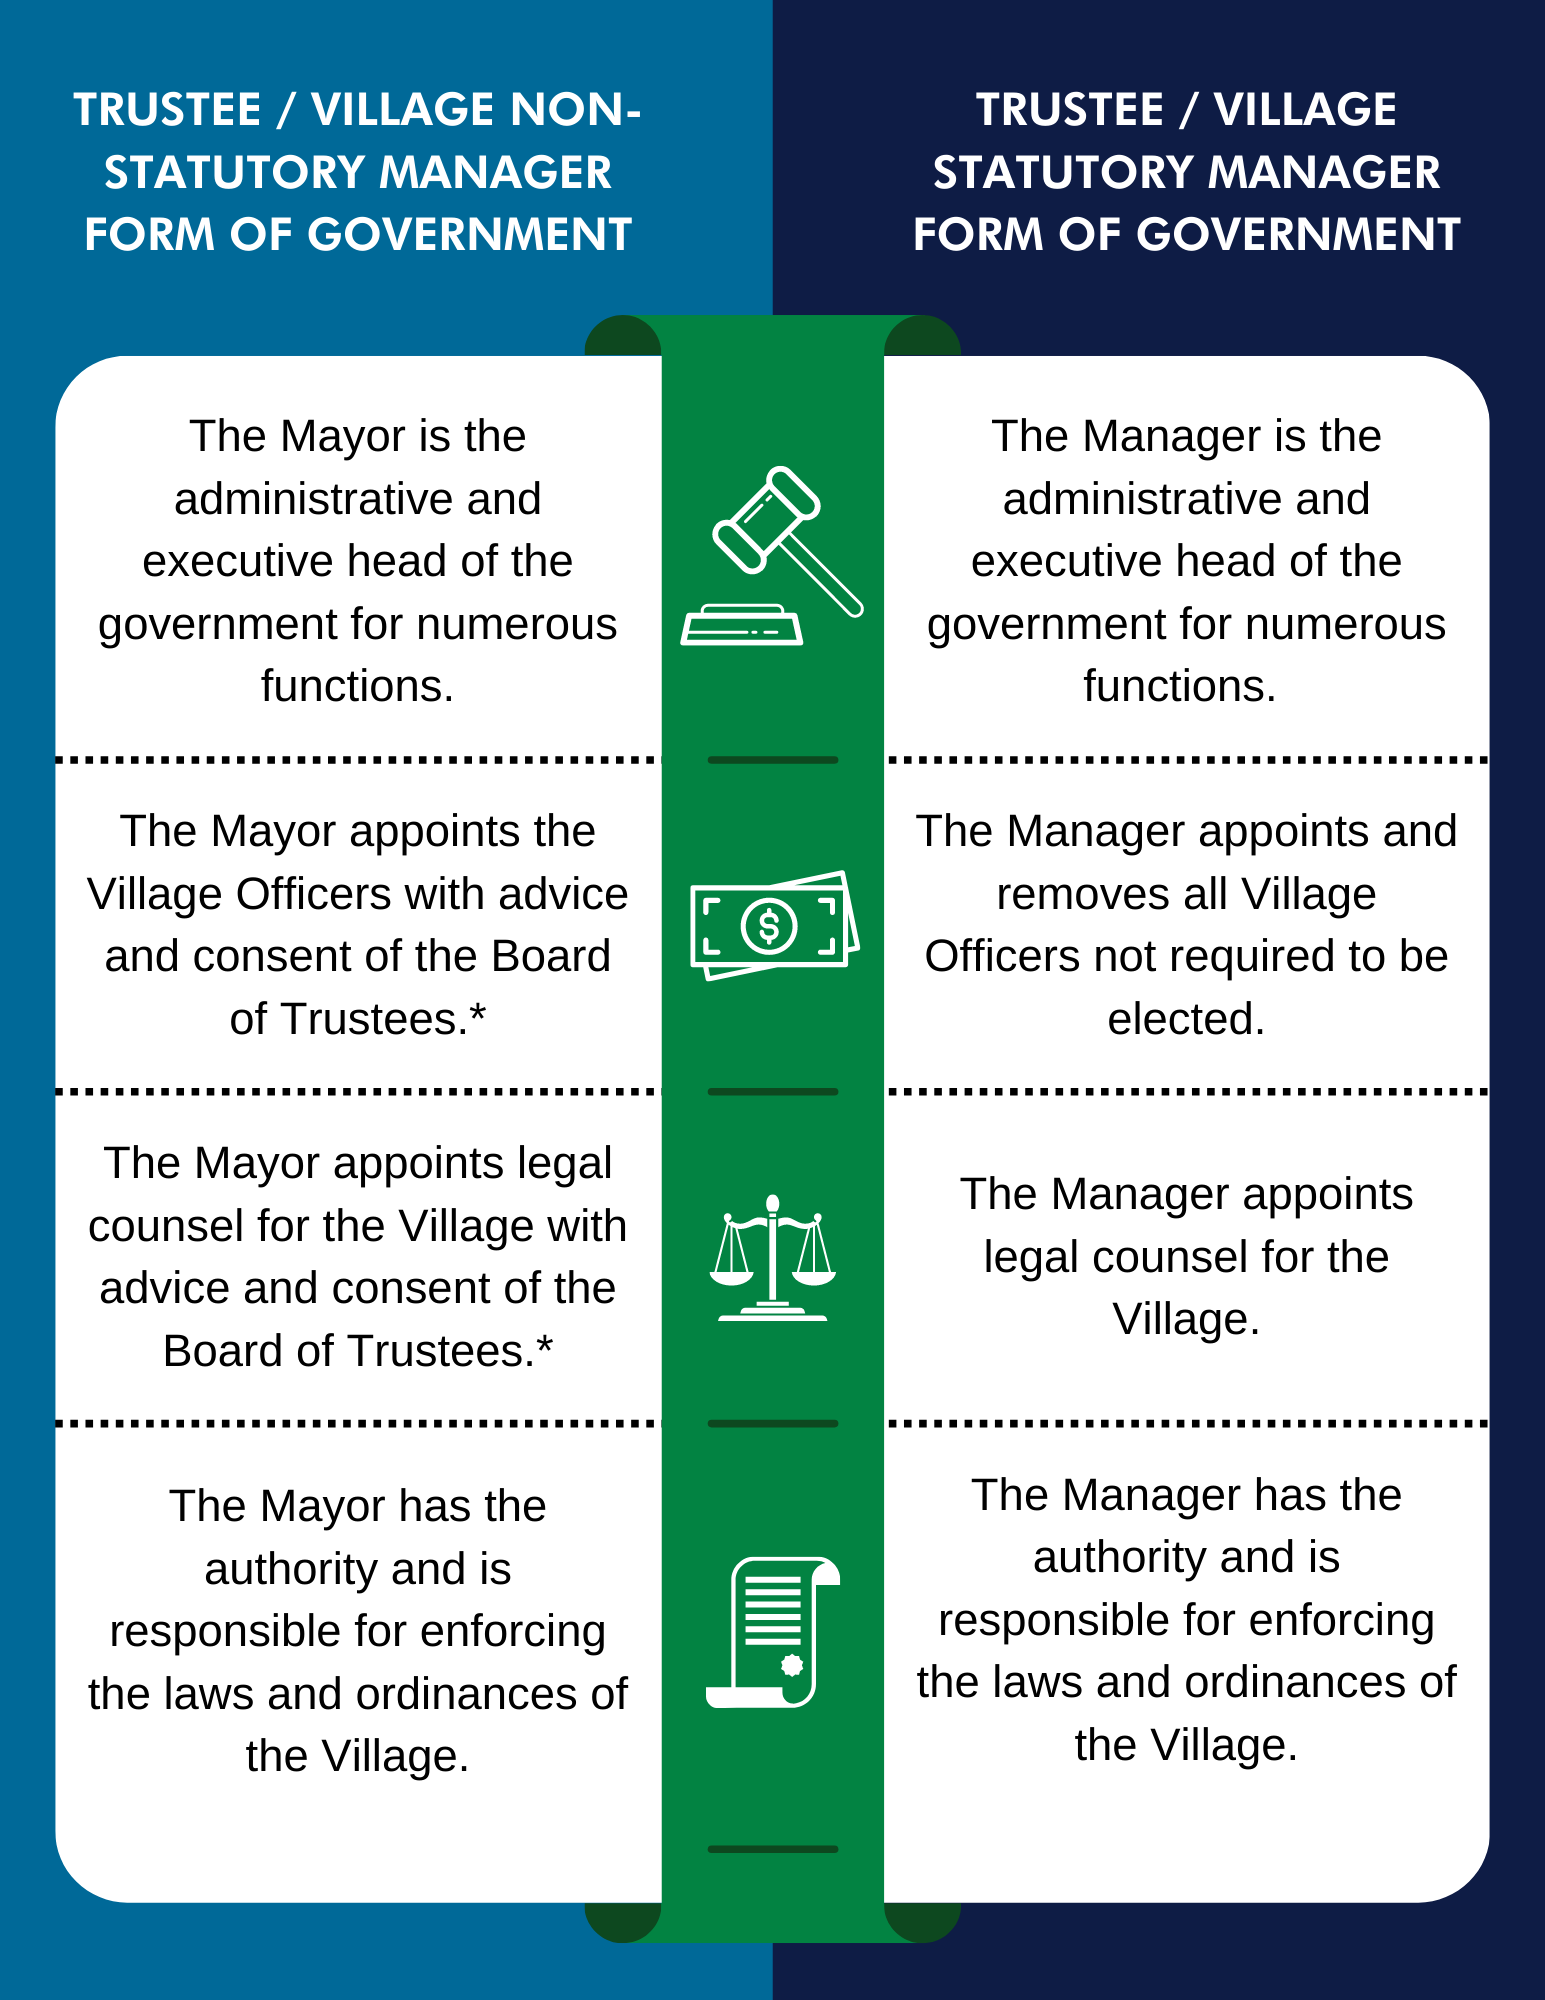 DIFFERENT FORMS OF GOVERNMENT (8)